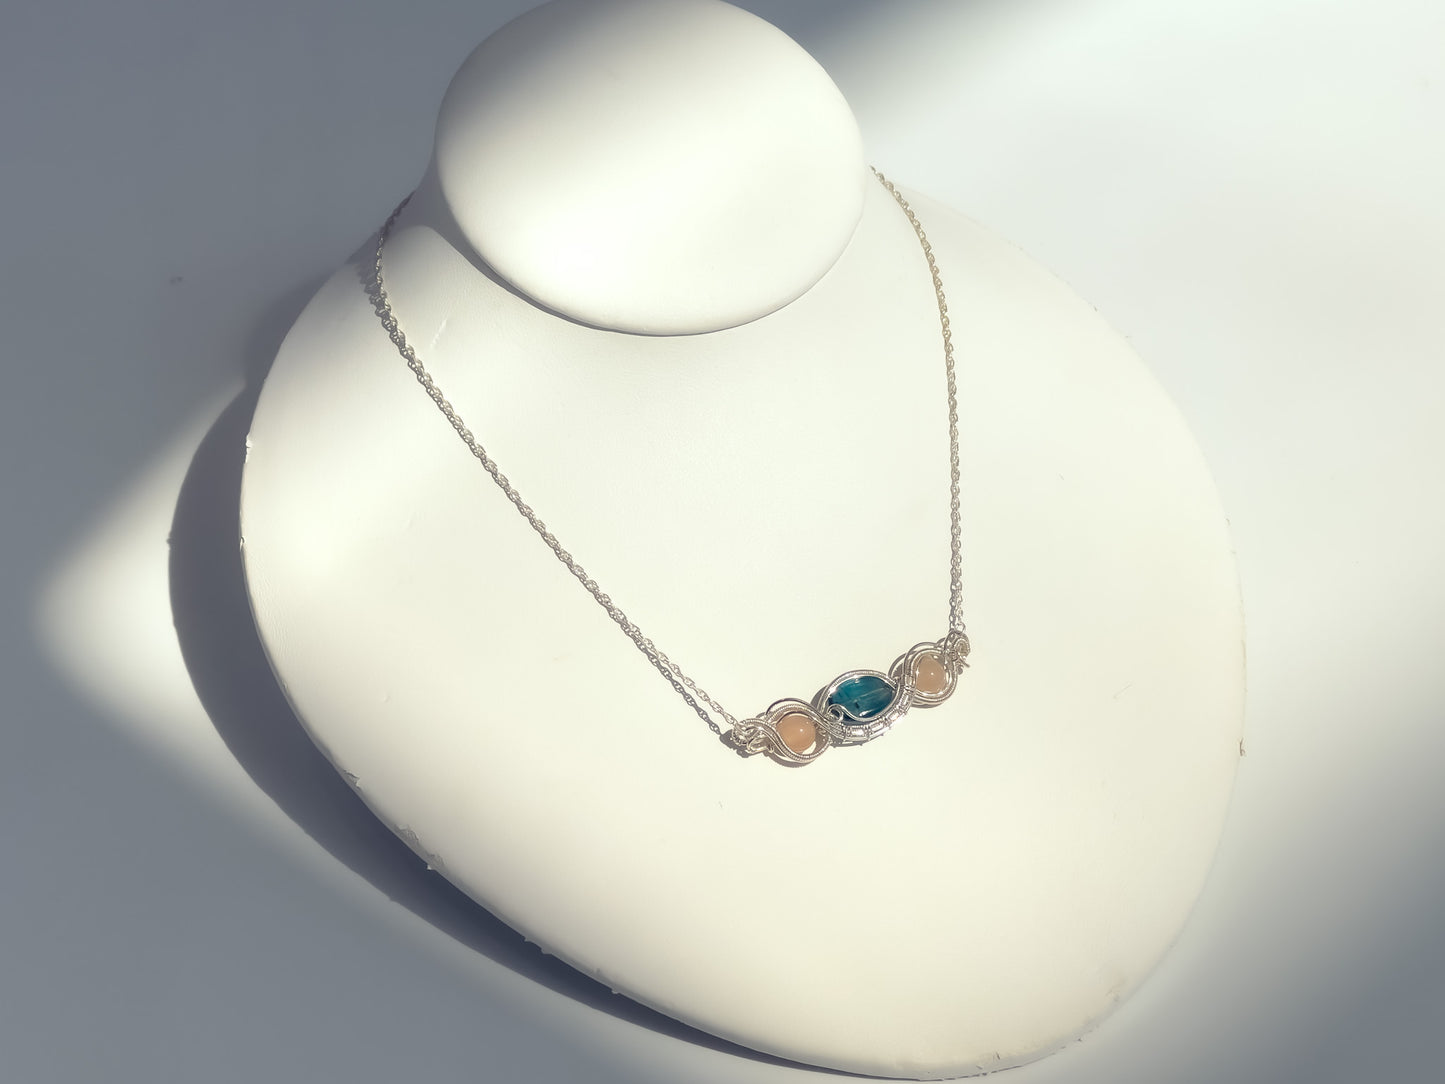 Silver wrapped Necklace with Natural Stones